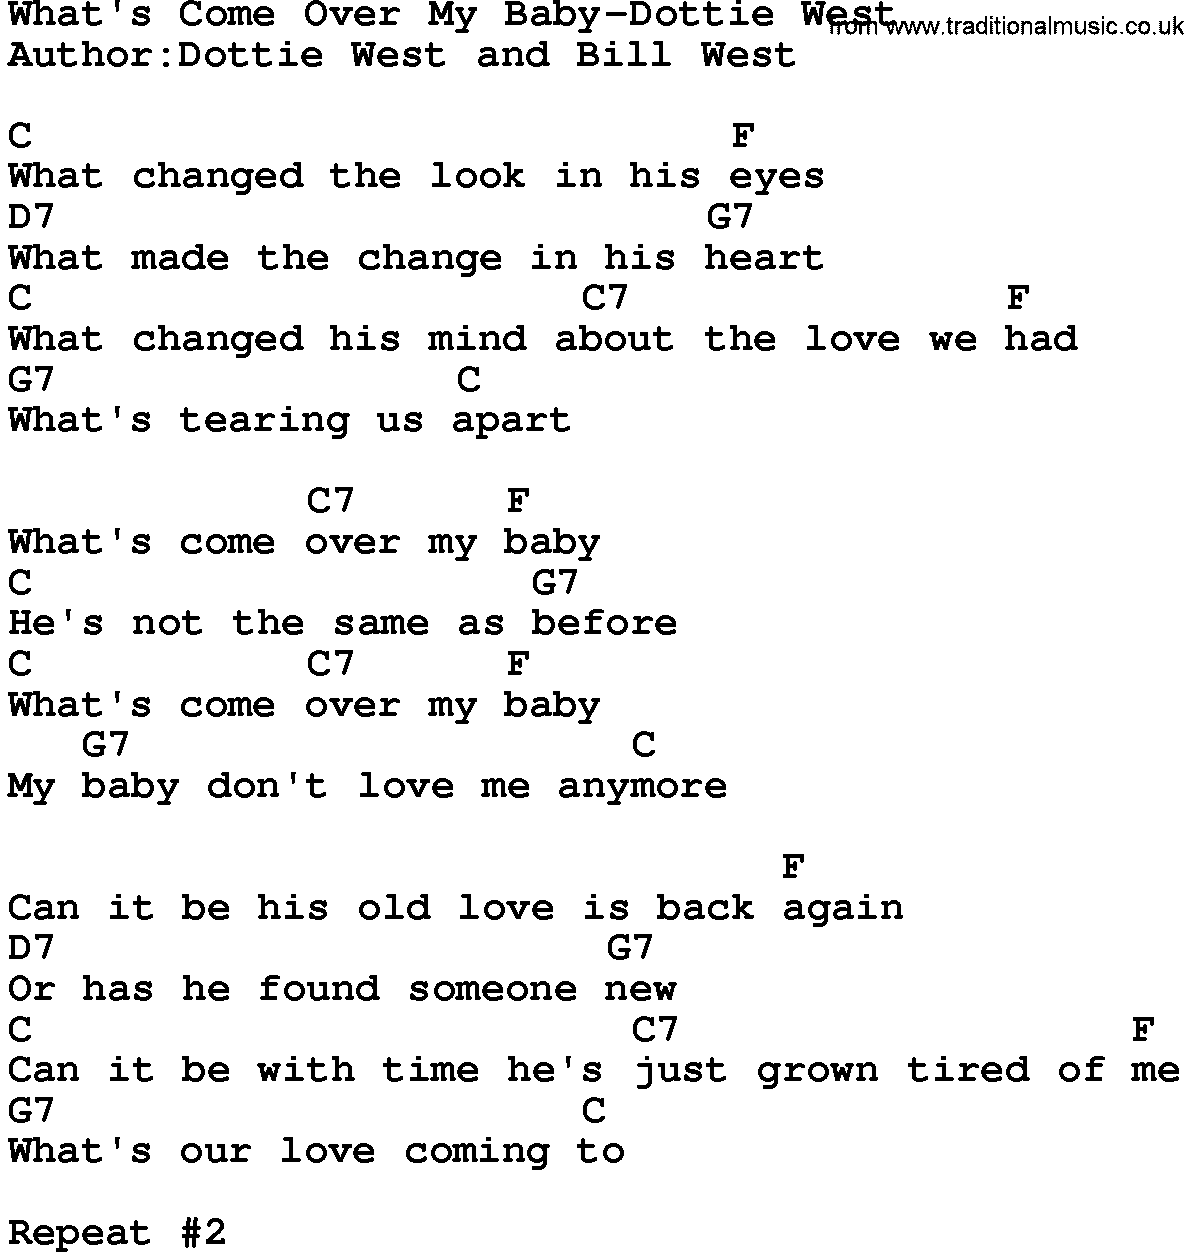 Country music song: What's Come Over My Baby-Dottie West lyrics and chords